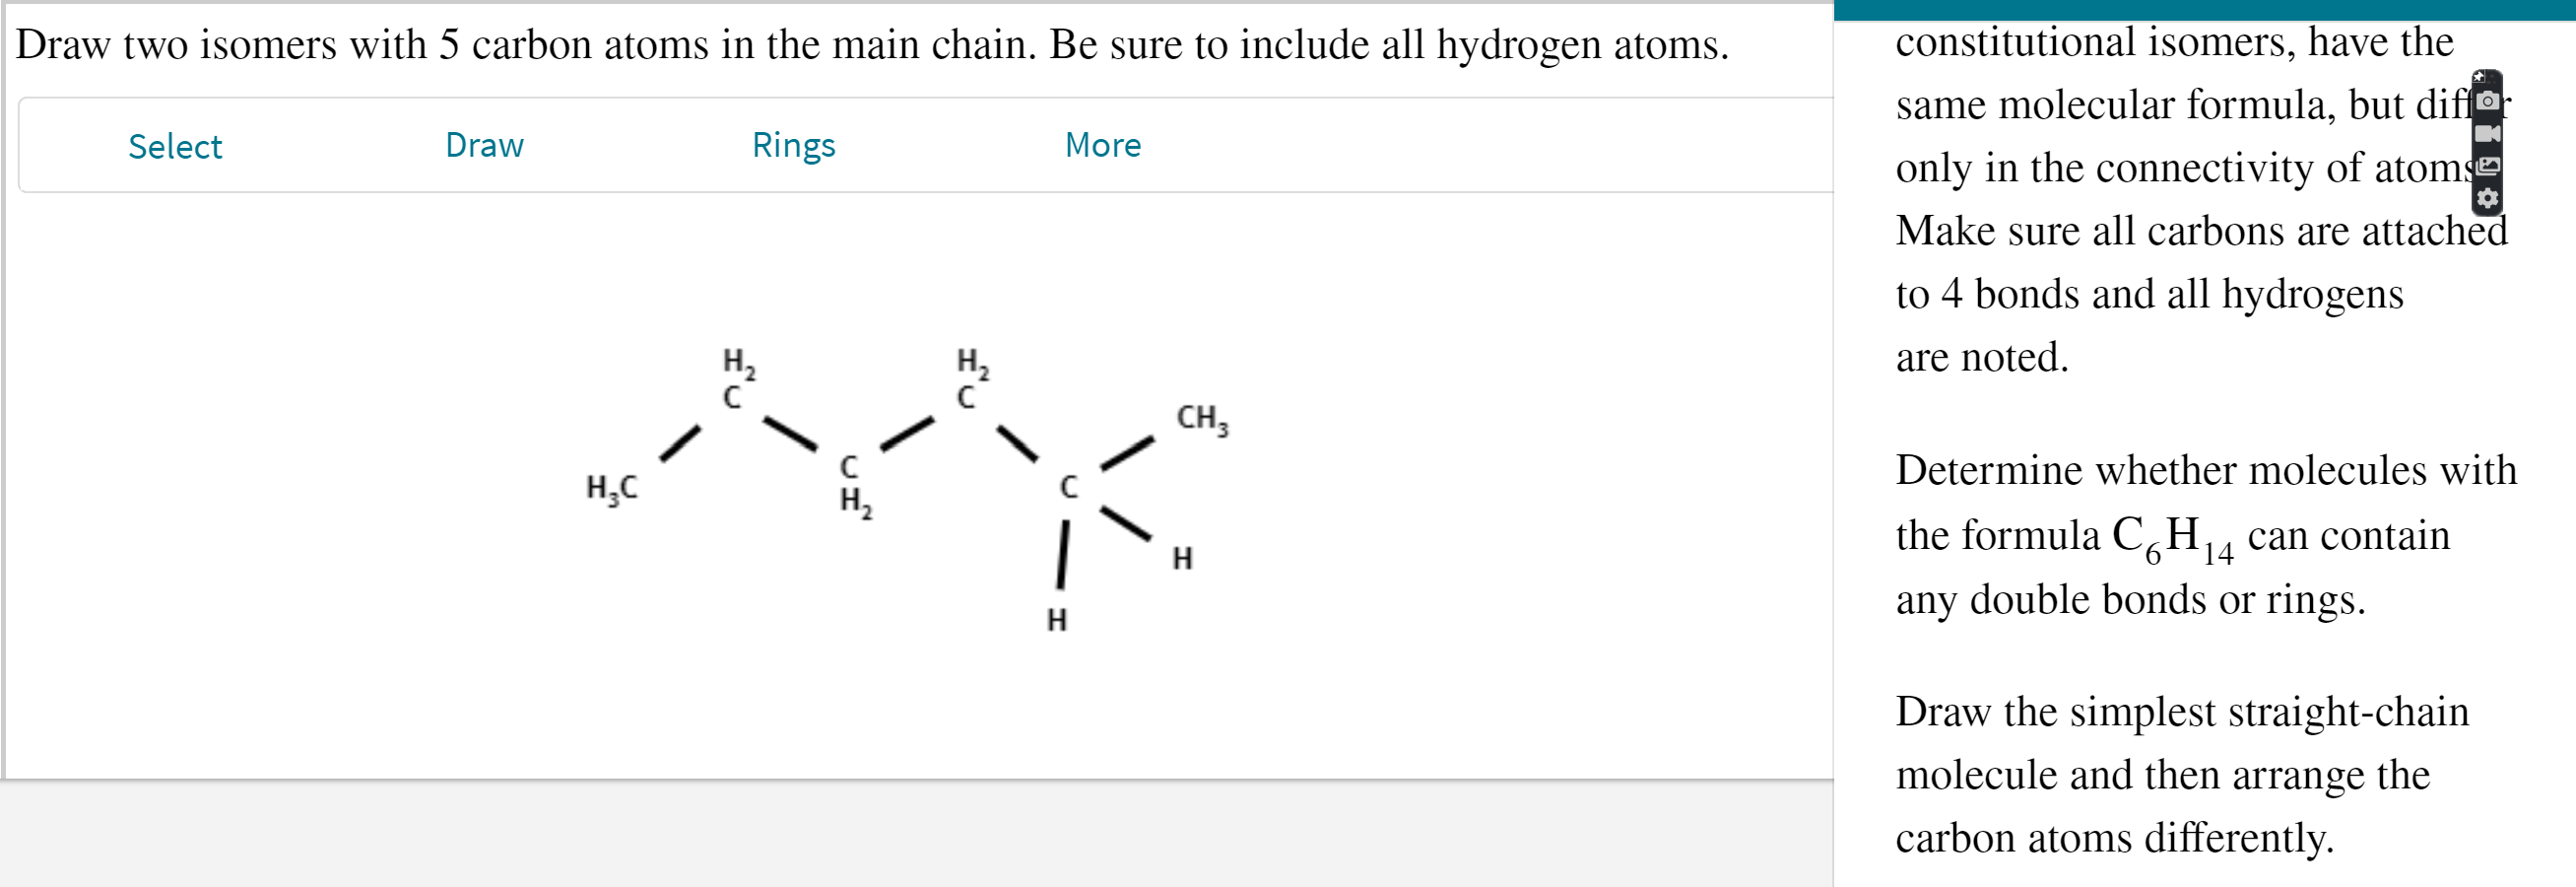 Solved Draw two isomers with 5 carbon atoms in the main